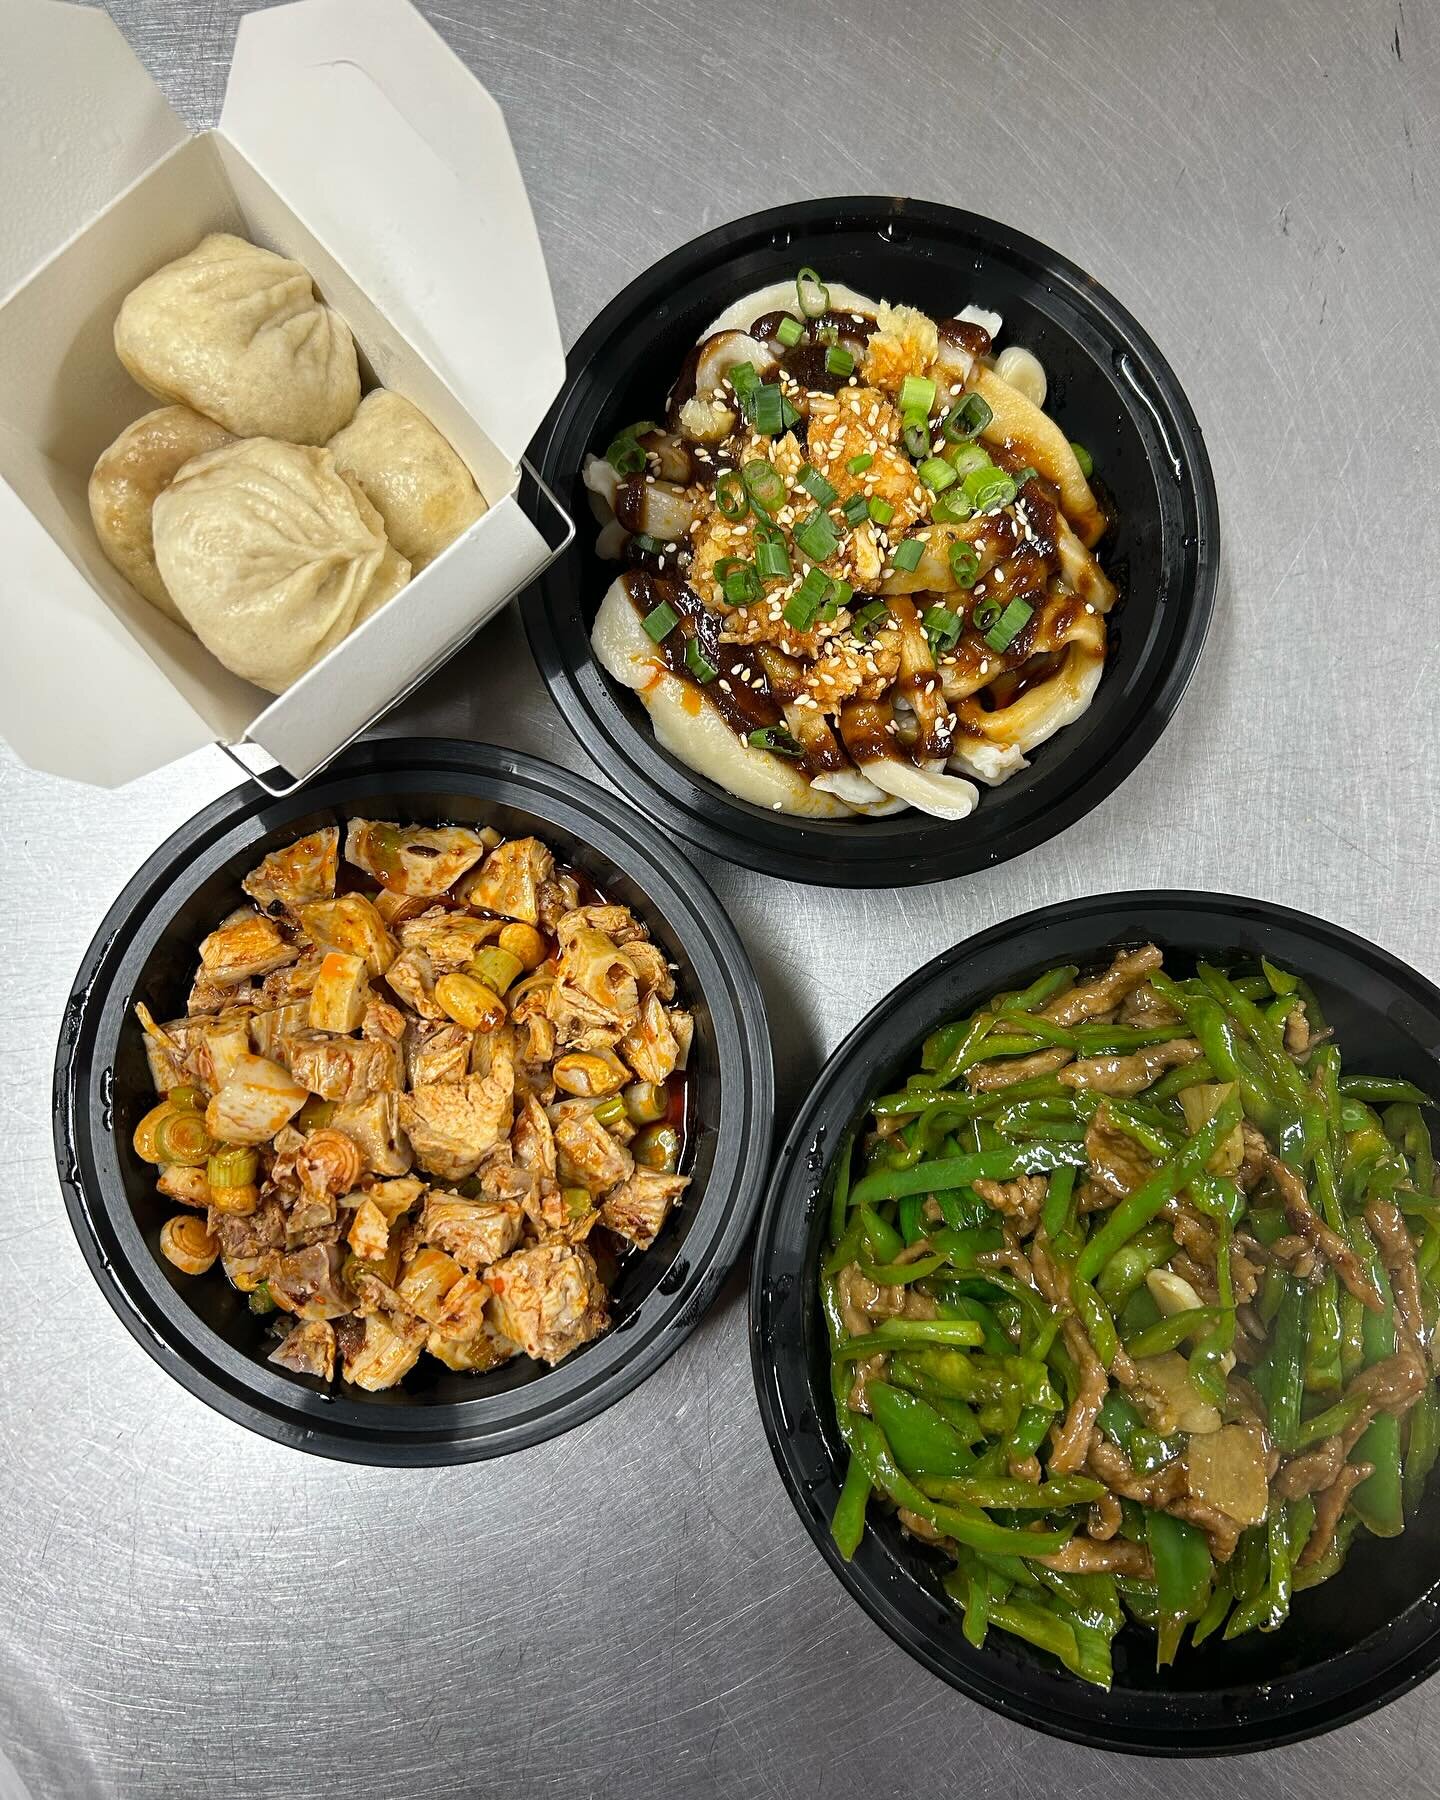 Lunch is served! Open until 2:15pm and back for dinner at 4:30pm 🍽️ 🥡

#philadelphia #philadelphiarestaurants #philadelphiafoodie #philadelphiafood #philadelphiafinds #philly #phillyrestaurants #phillyfood #phillyfoodie #phillyeats #phillygoodeats 